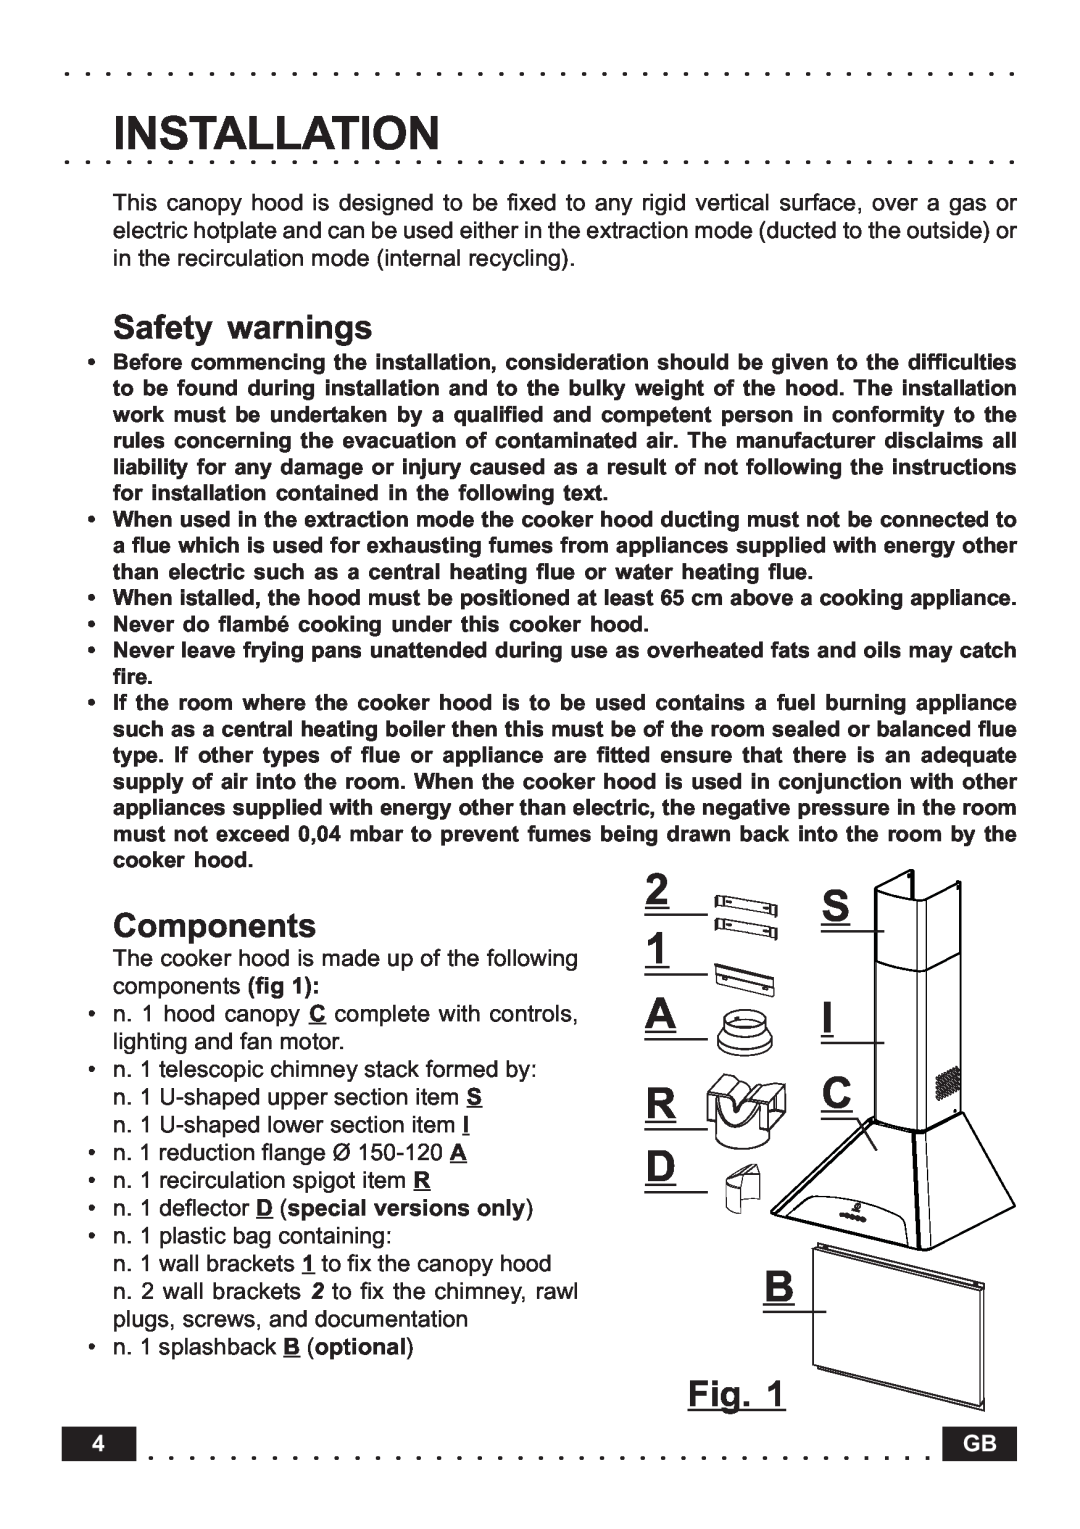 Indesit HI561 IXUK manual Installation, A R C D B, Safety warnings, Components, n. 1 deflector D special versions only 